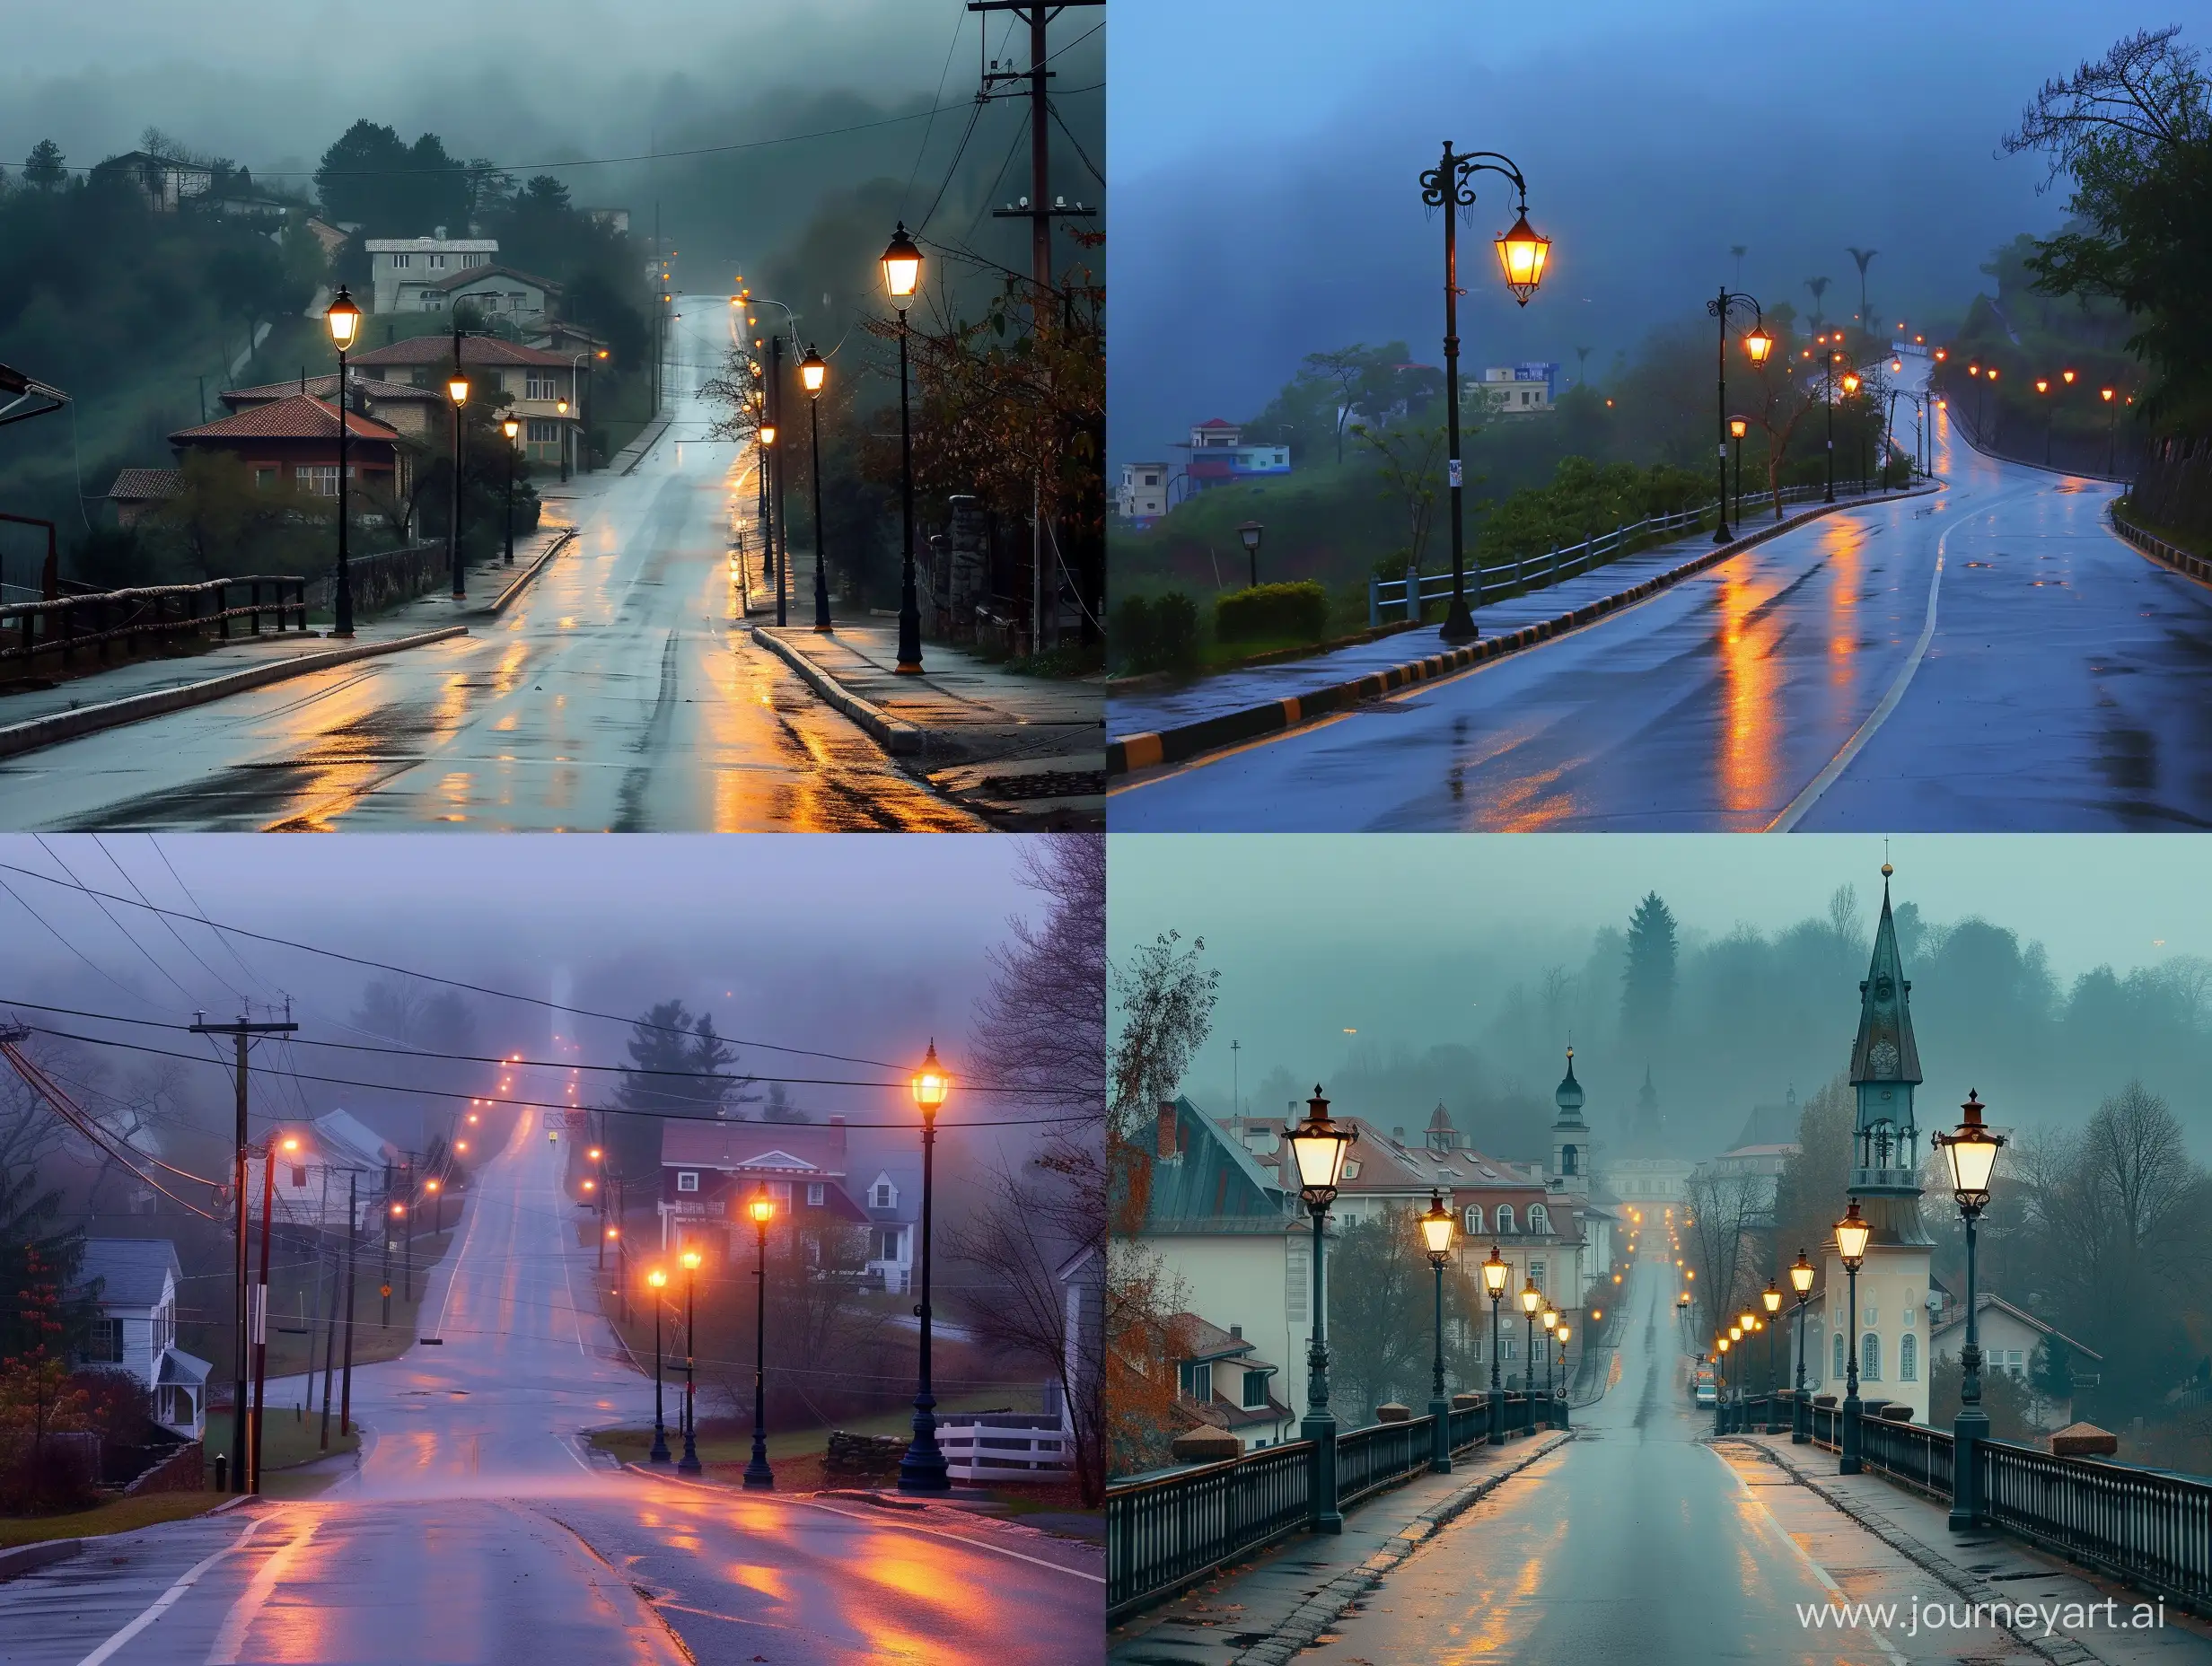 Quiet-Morning-Stroll-in-Rainy-Town-with-Street-Lamps